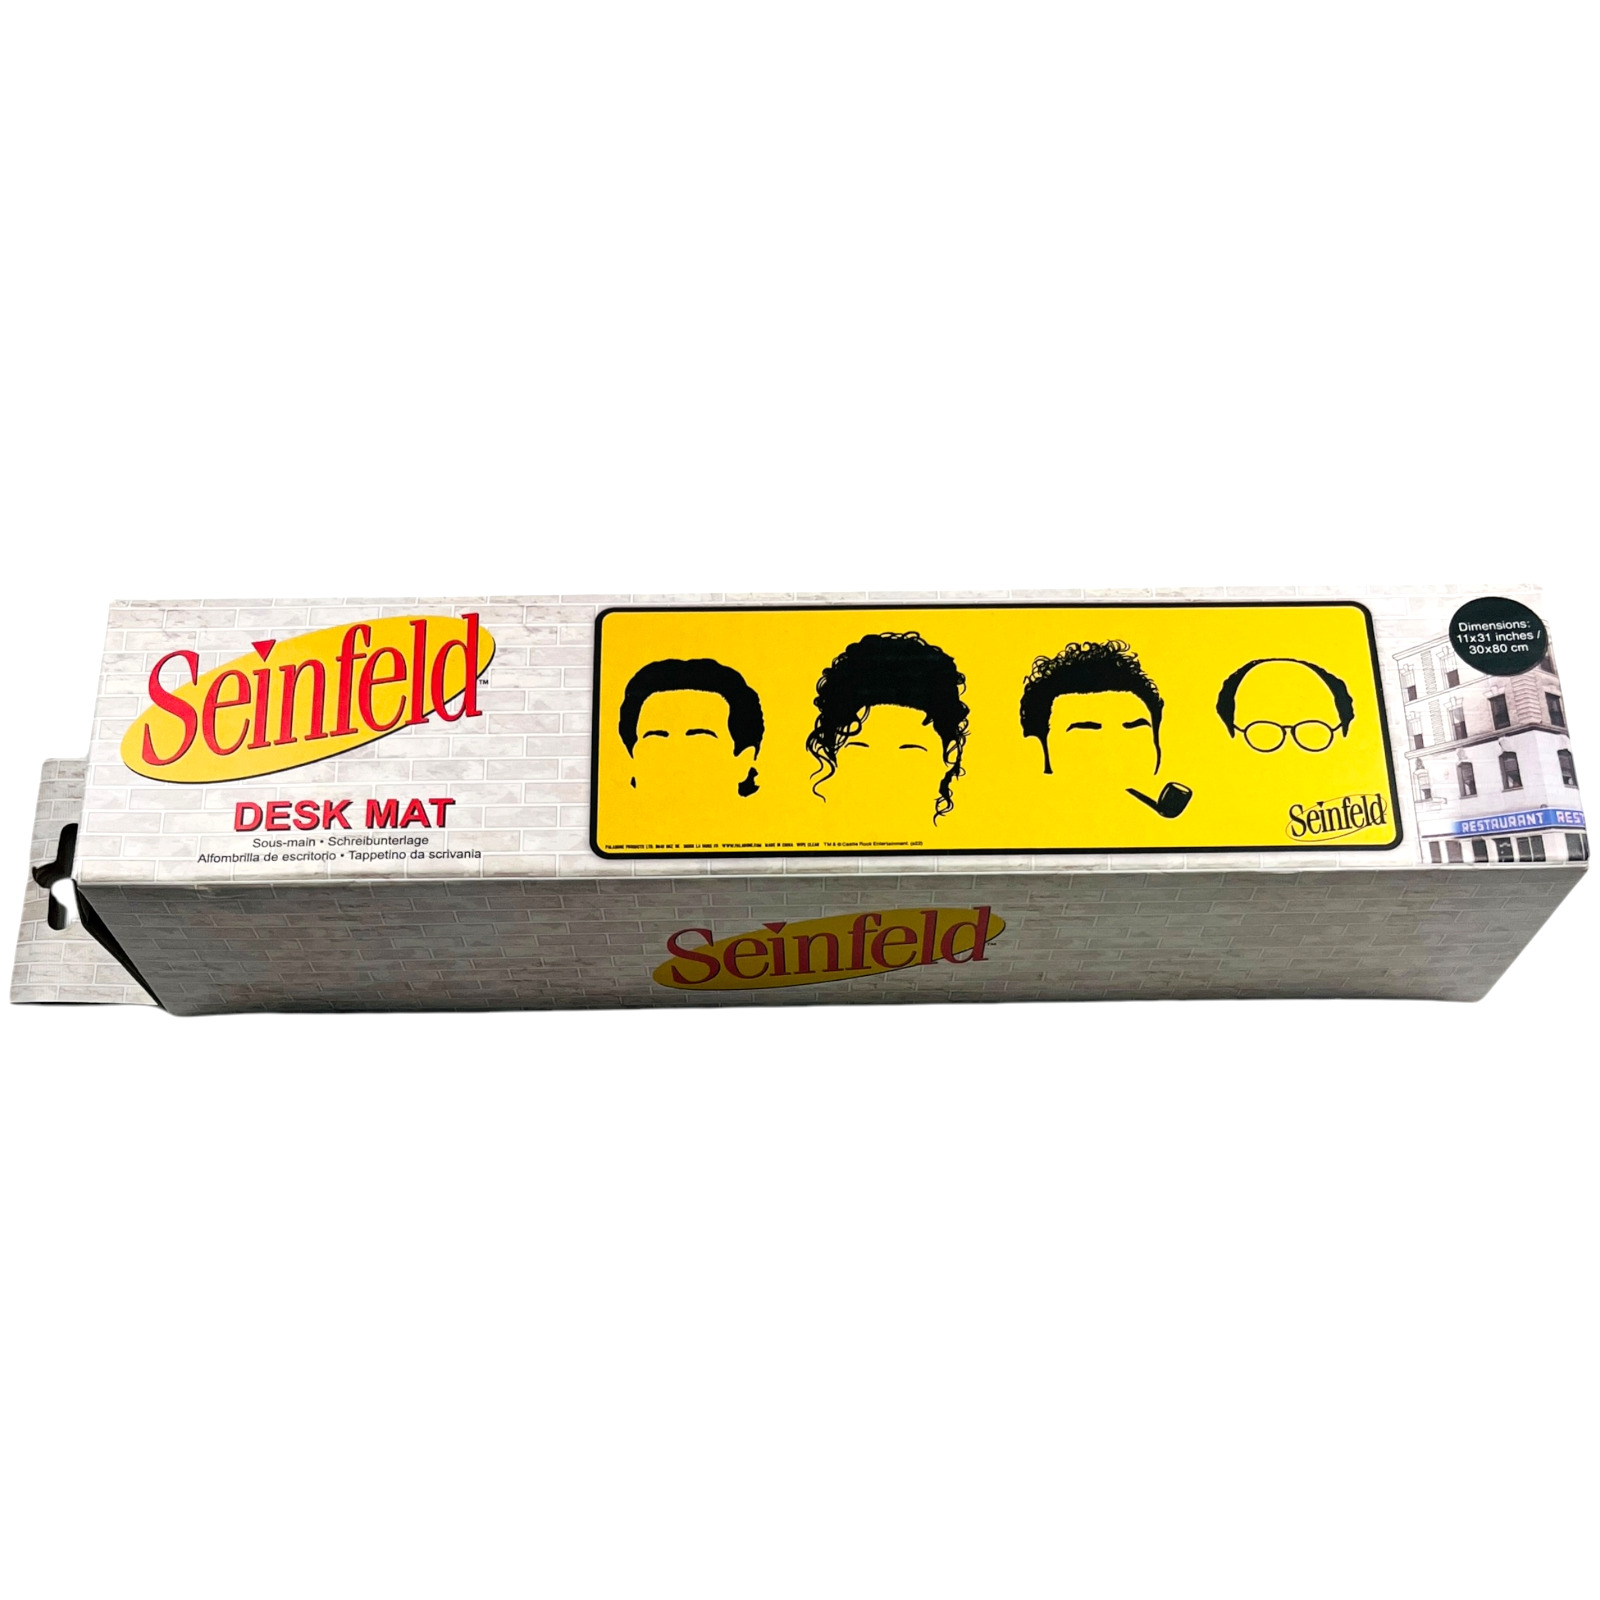 Seinfeld Desk Mat - Color Yellow Large Size 11 x 31 in - NEW in BOX - Rare